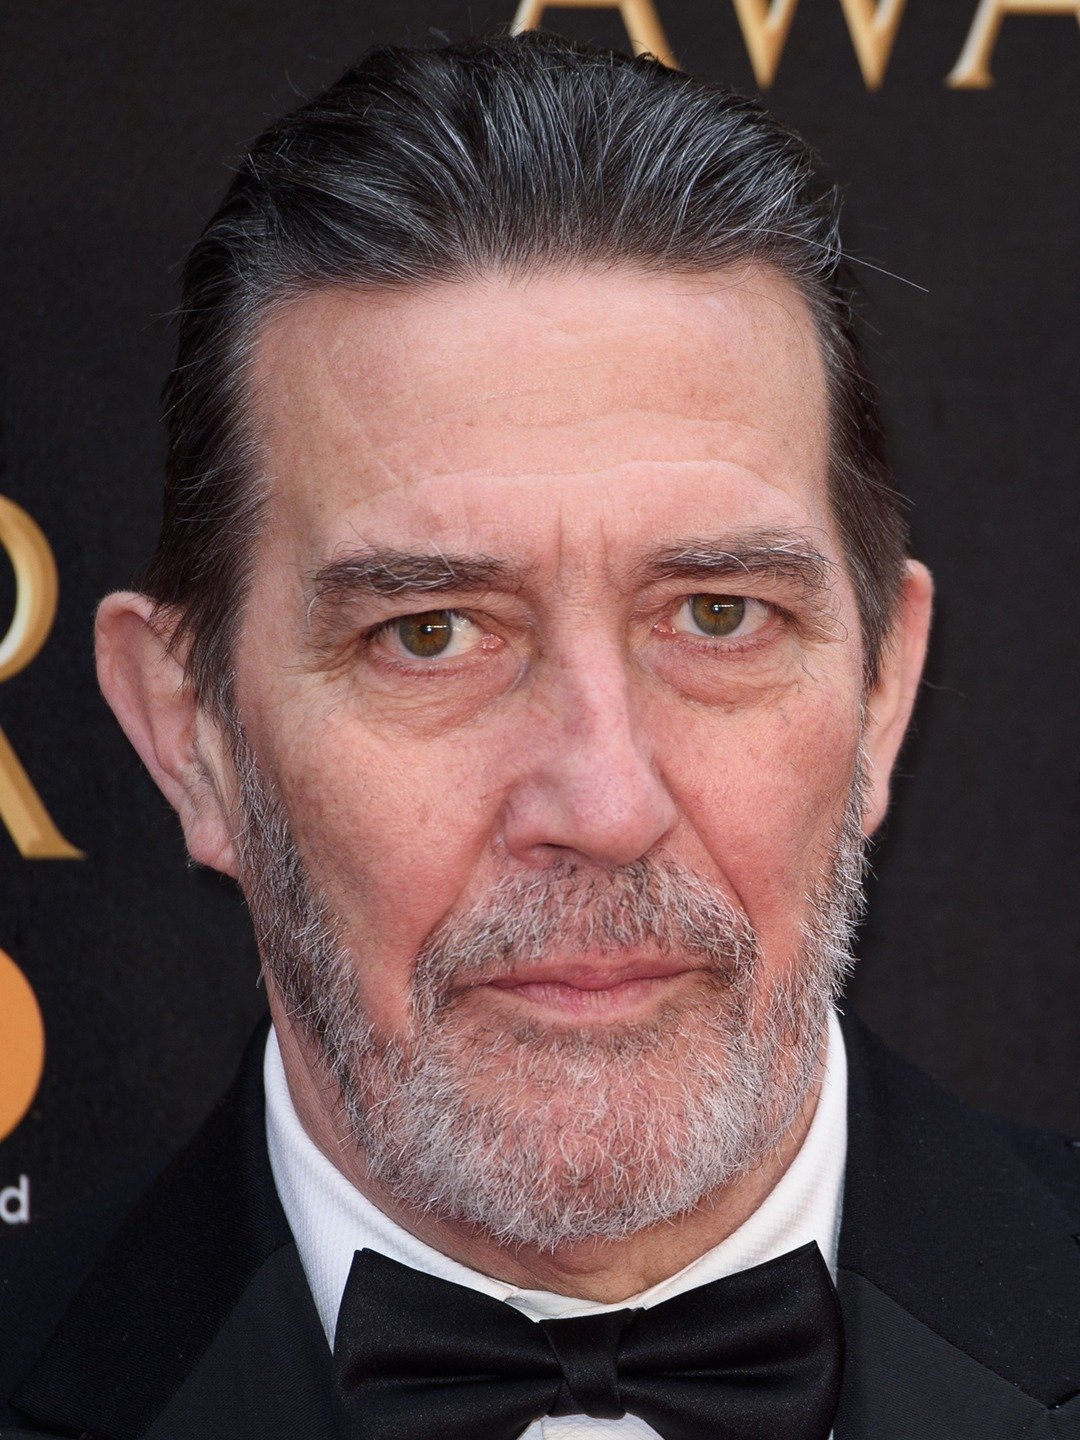 How tall is Ciaran Hinds?